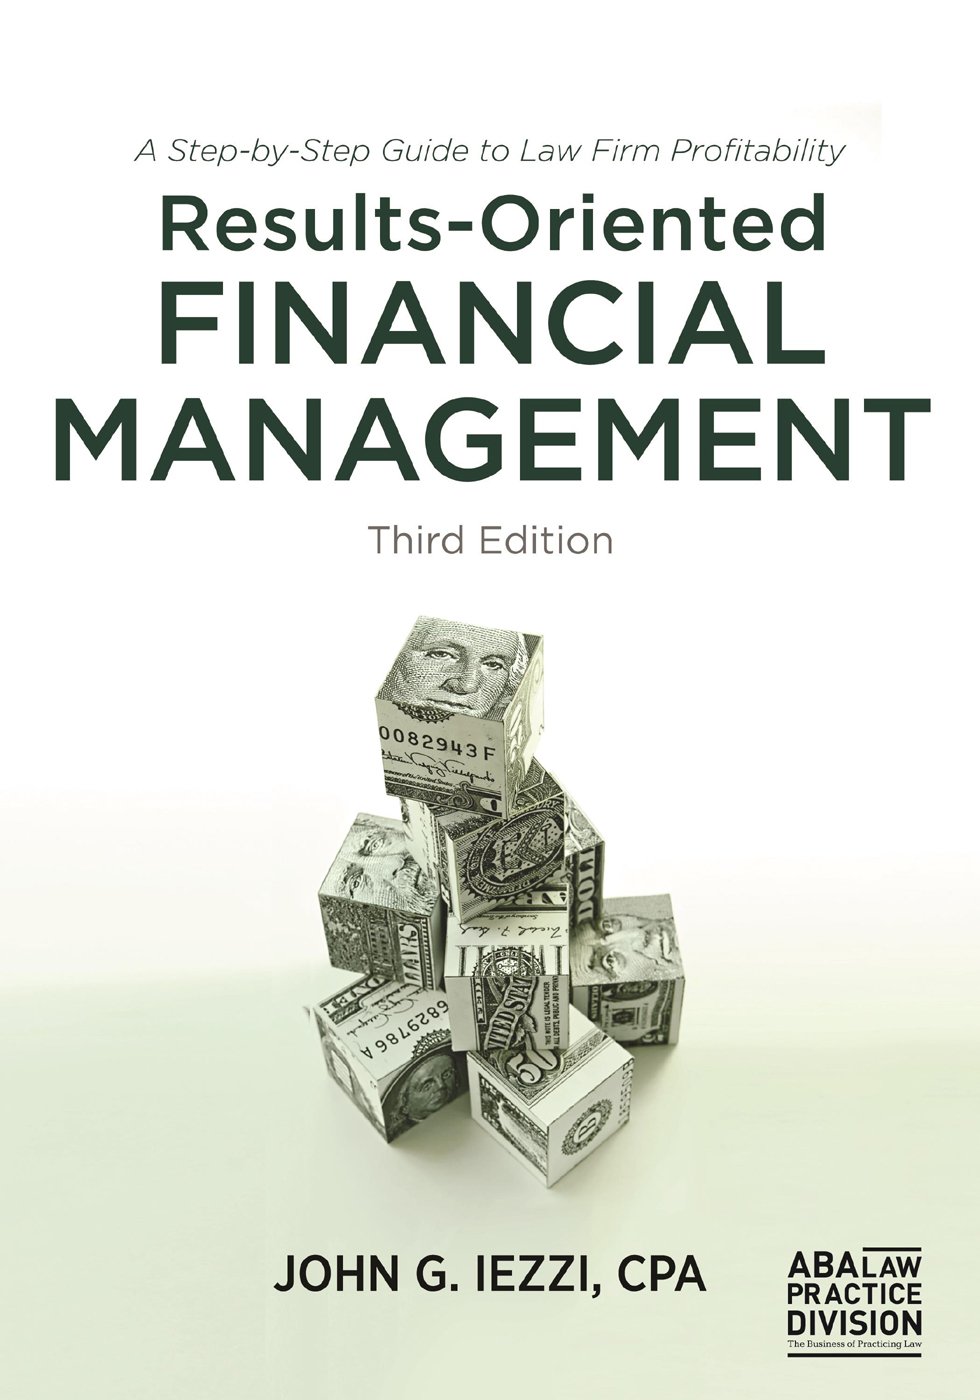 Results-Oriented Financial Management: A Step-by-Step Guide to Law Firm Profitability